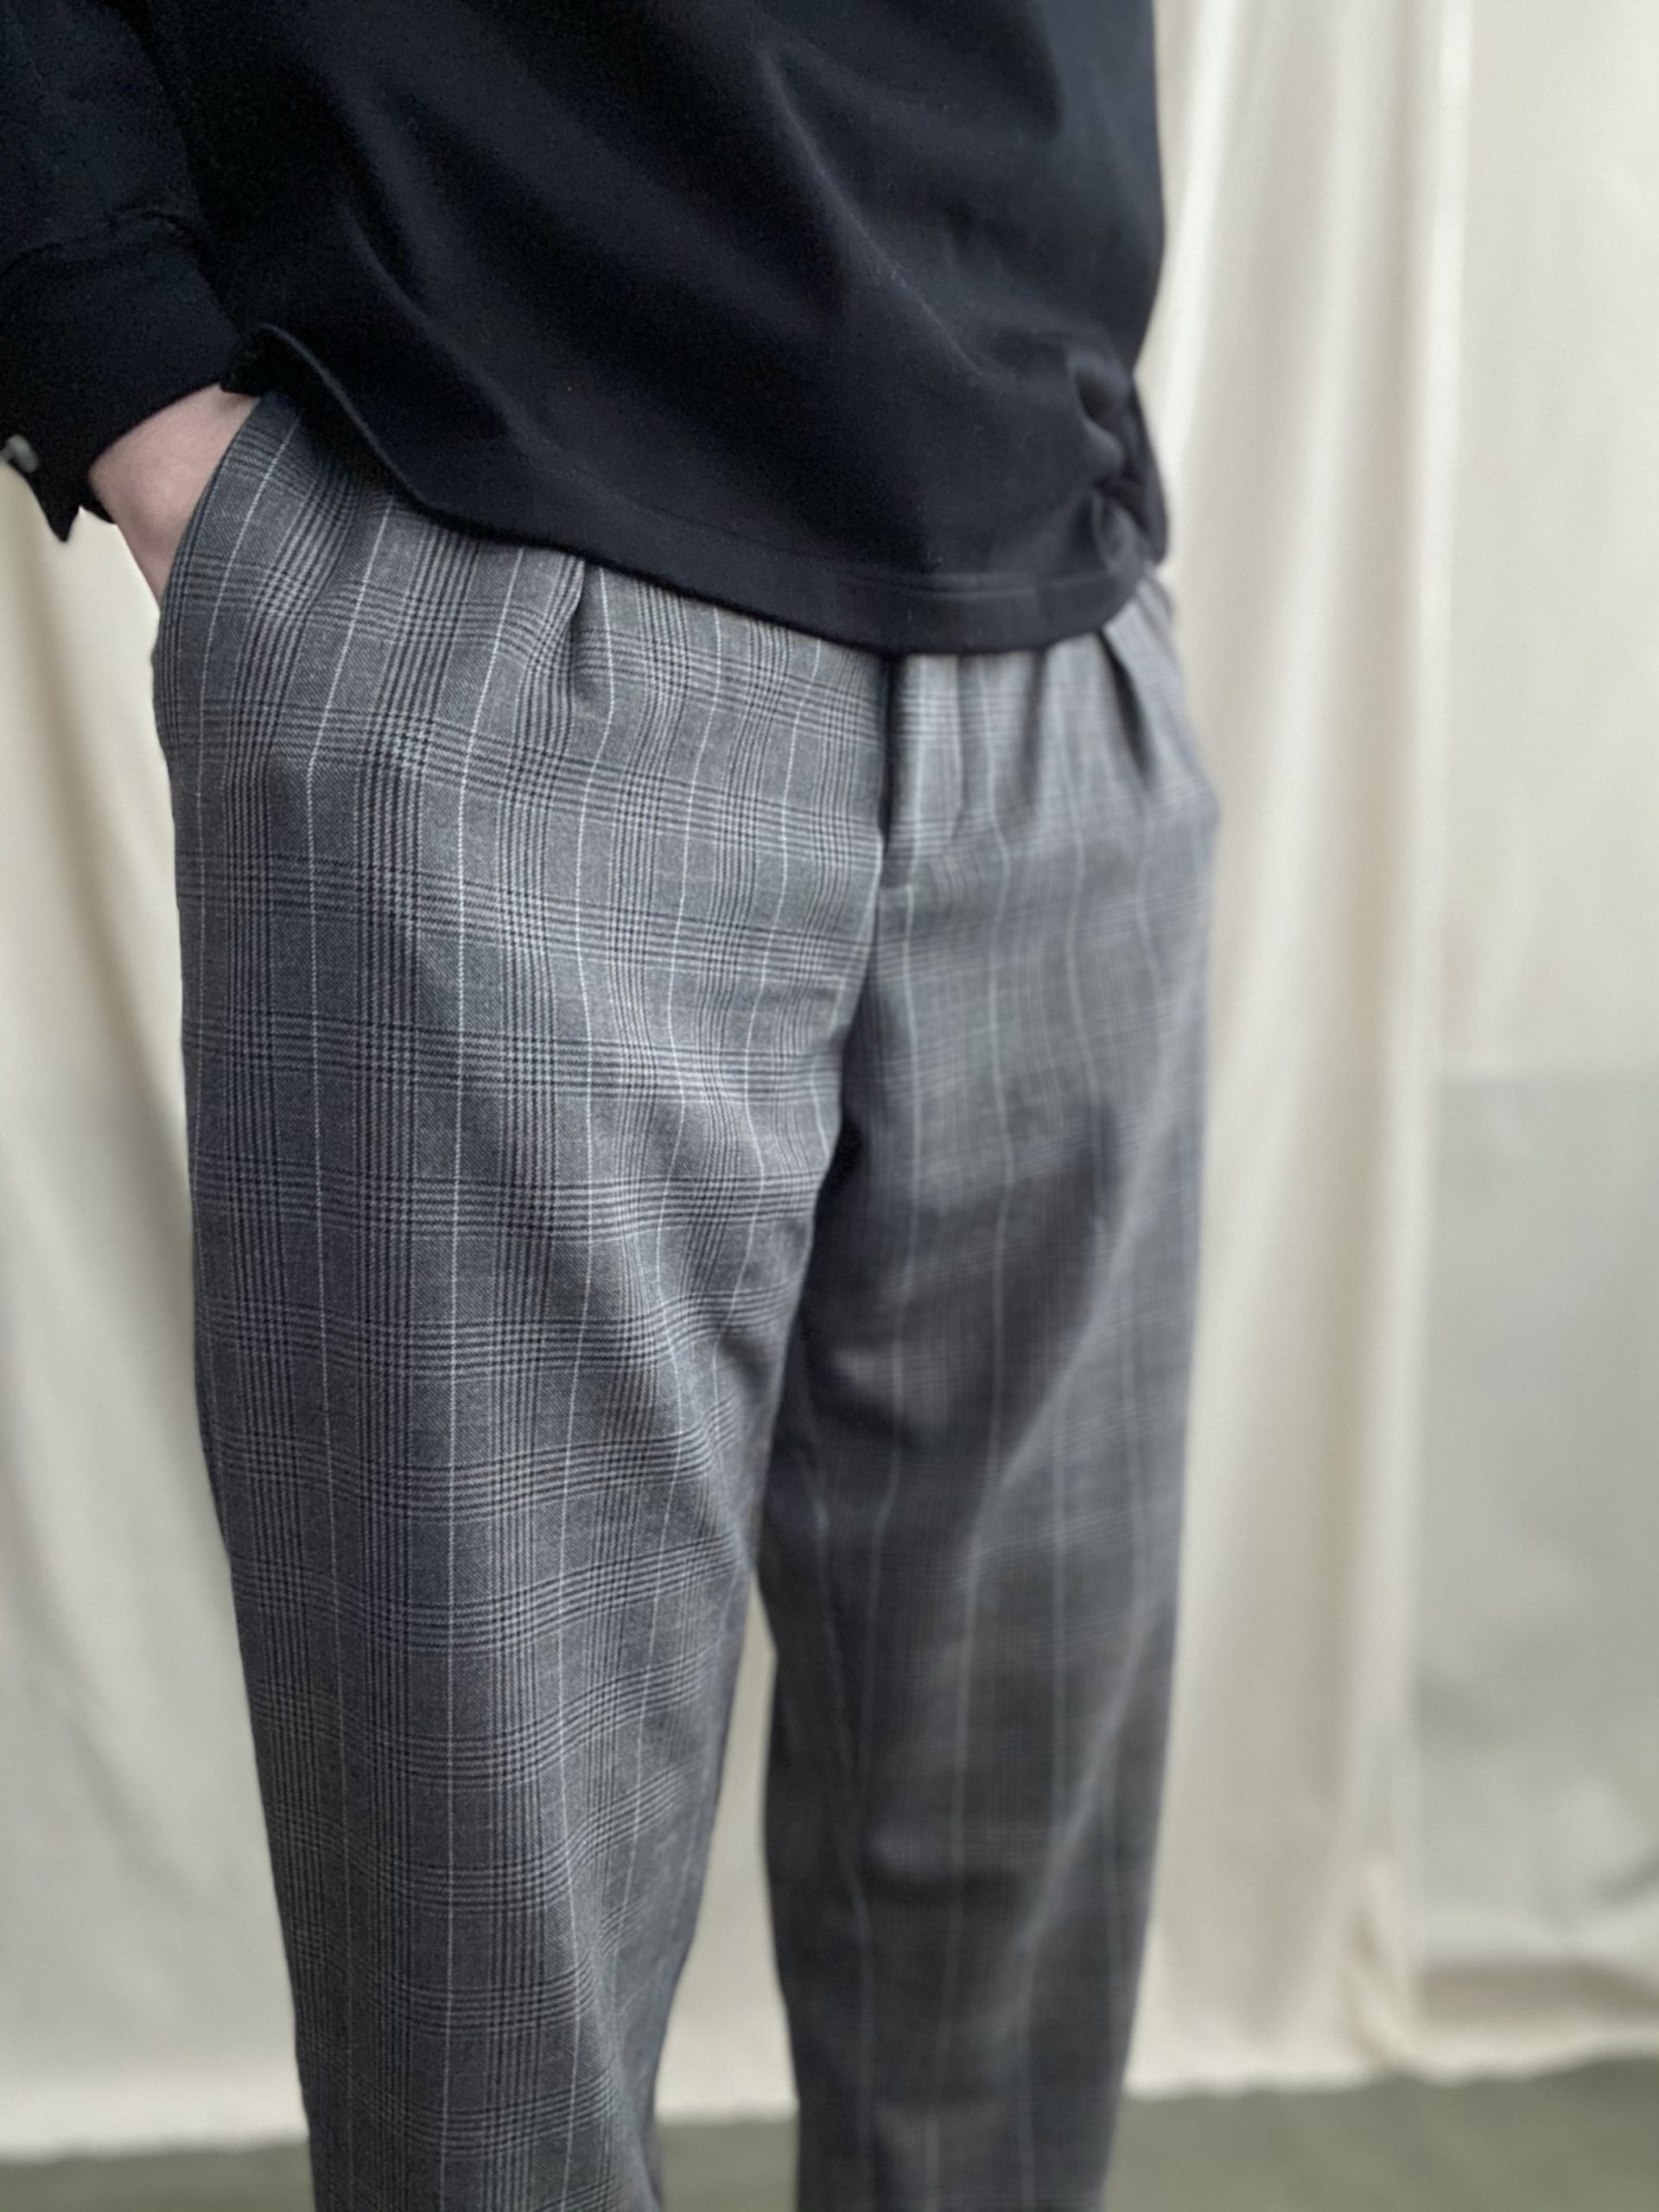 Read more about the article 【weac.】ACTIVE SLACKS/チェックパンツはバランサー。